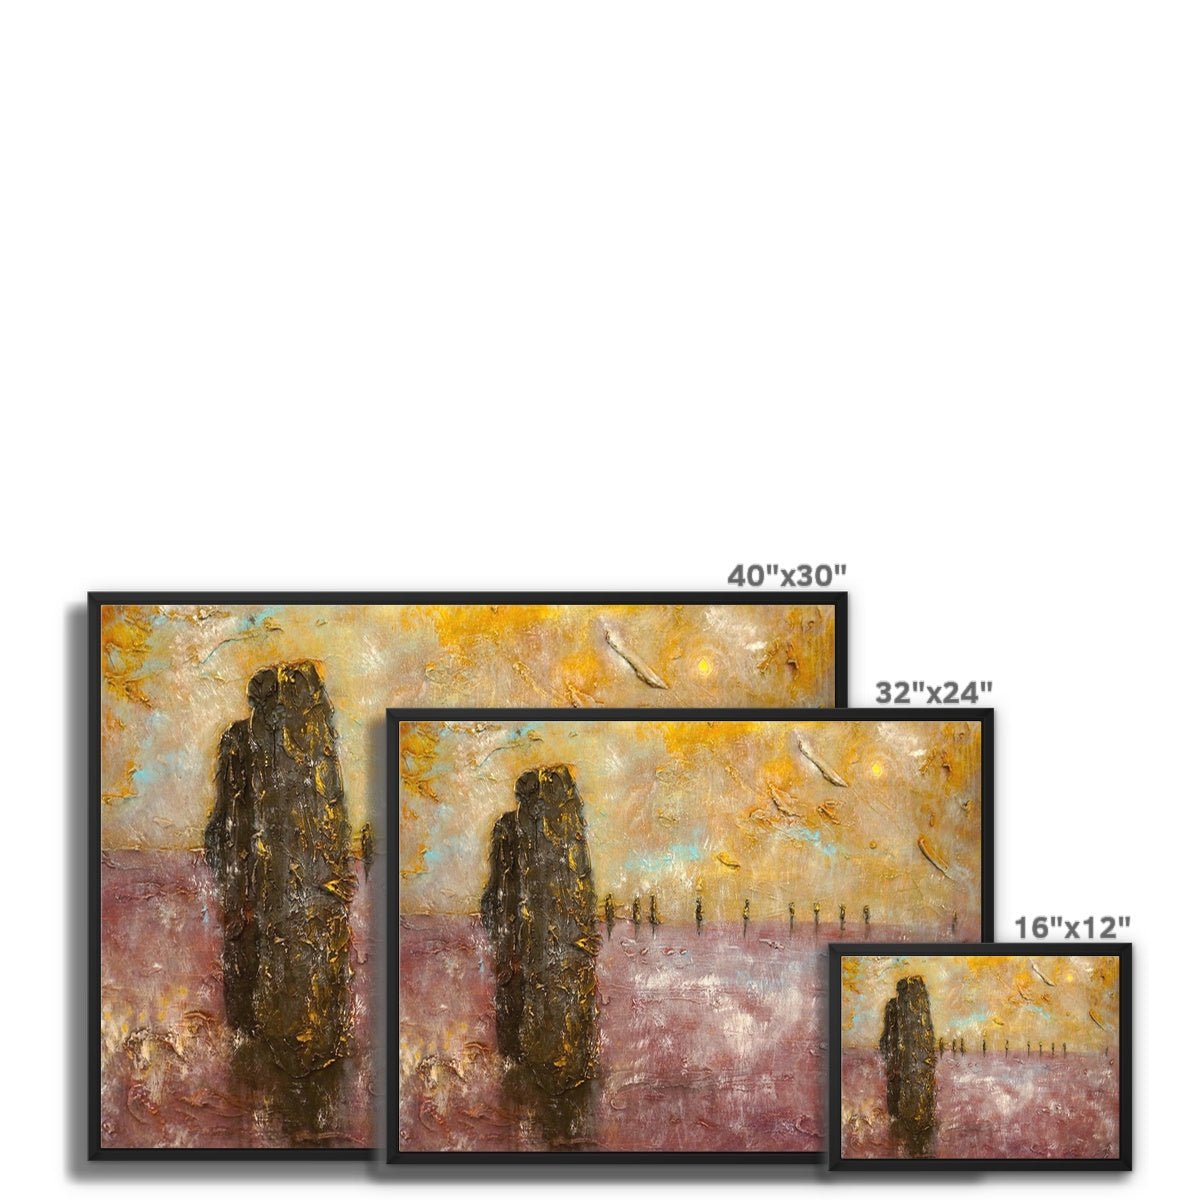 Brodgar Mist Orkney Painting | Framed Canvas From Scotland-Floating Framed Canvas Prints-Orkney Art Gallery-Paintings, Prints, Homeware, Art Gifts From Scotland By Scottish Artist Kevin Hunter